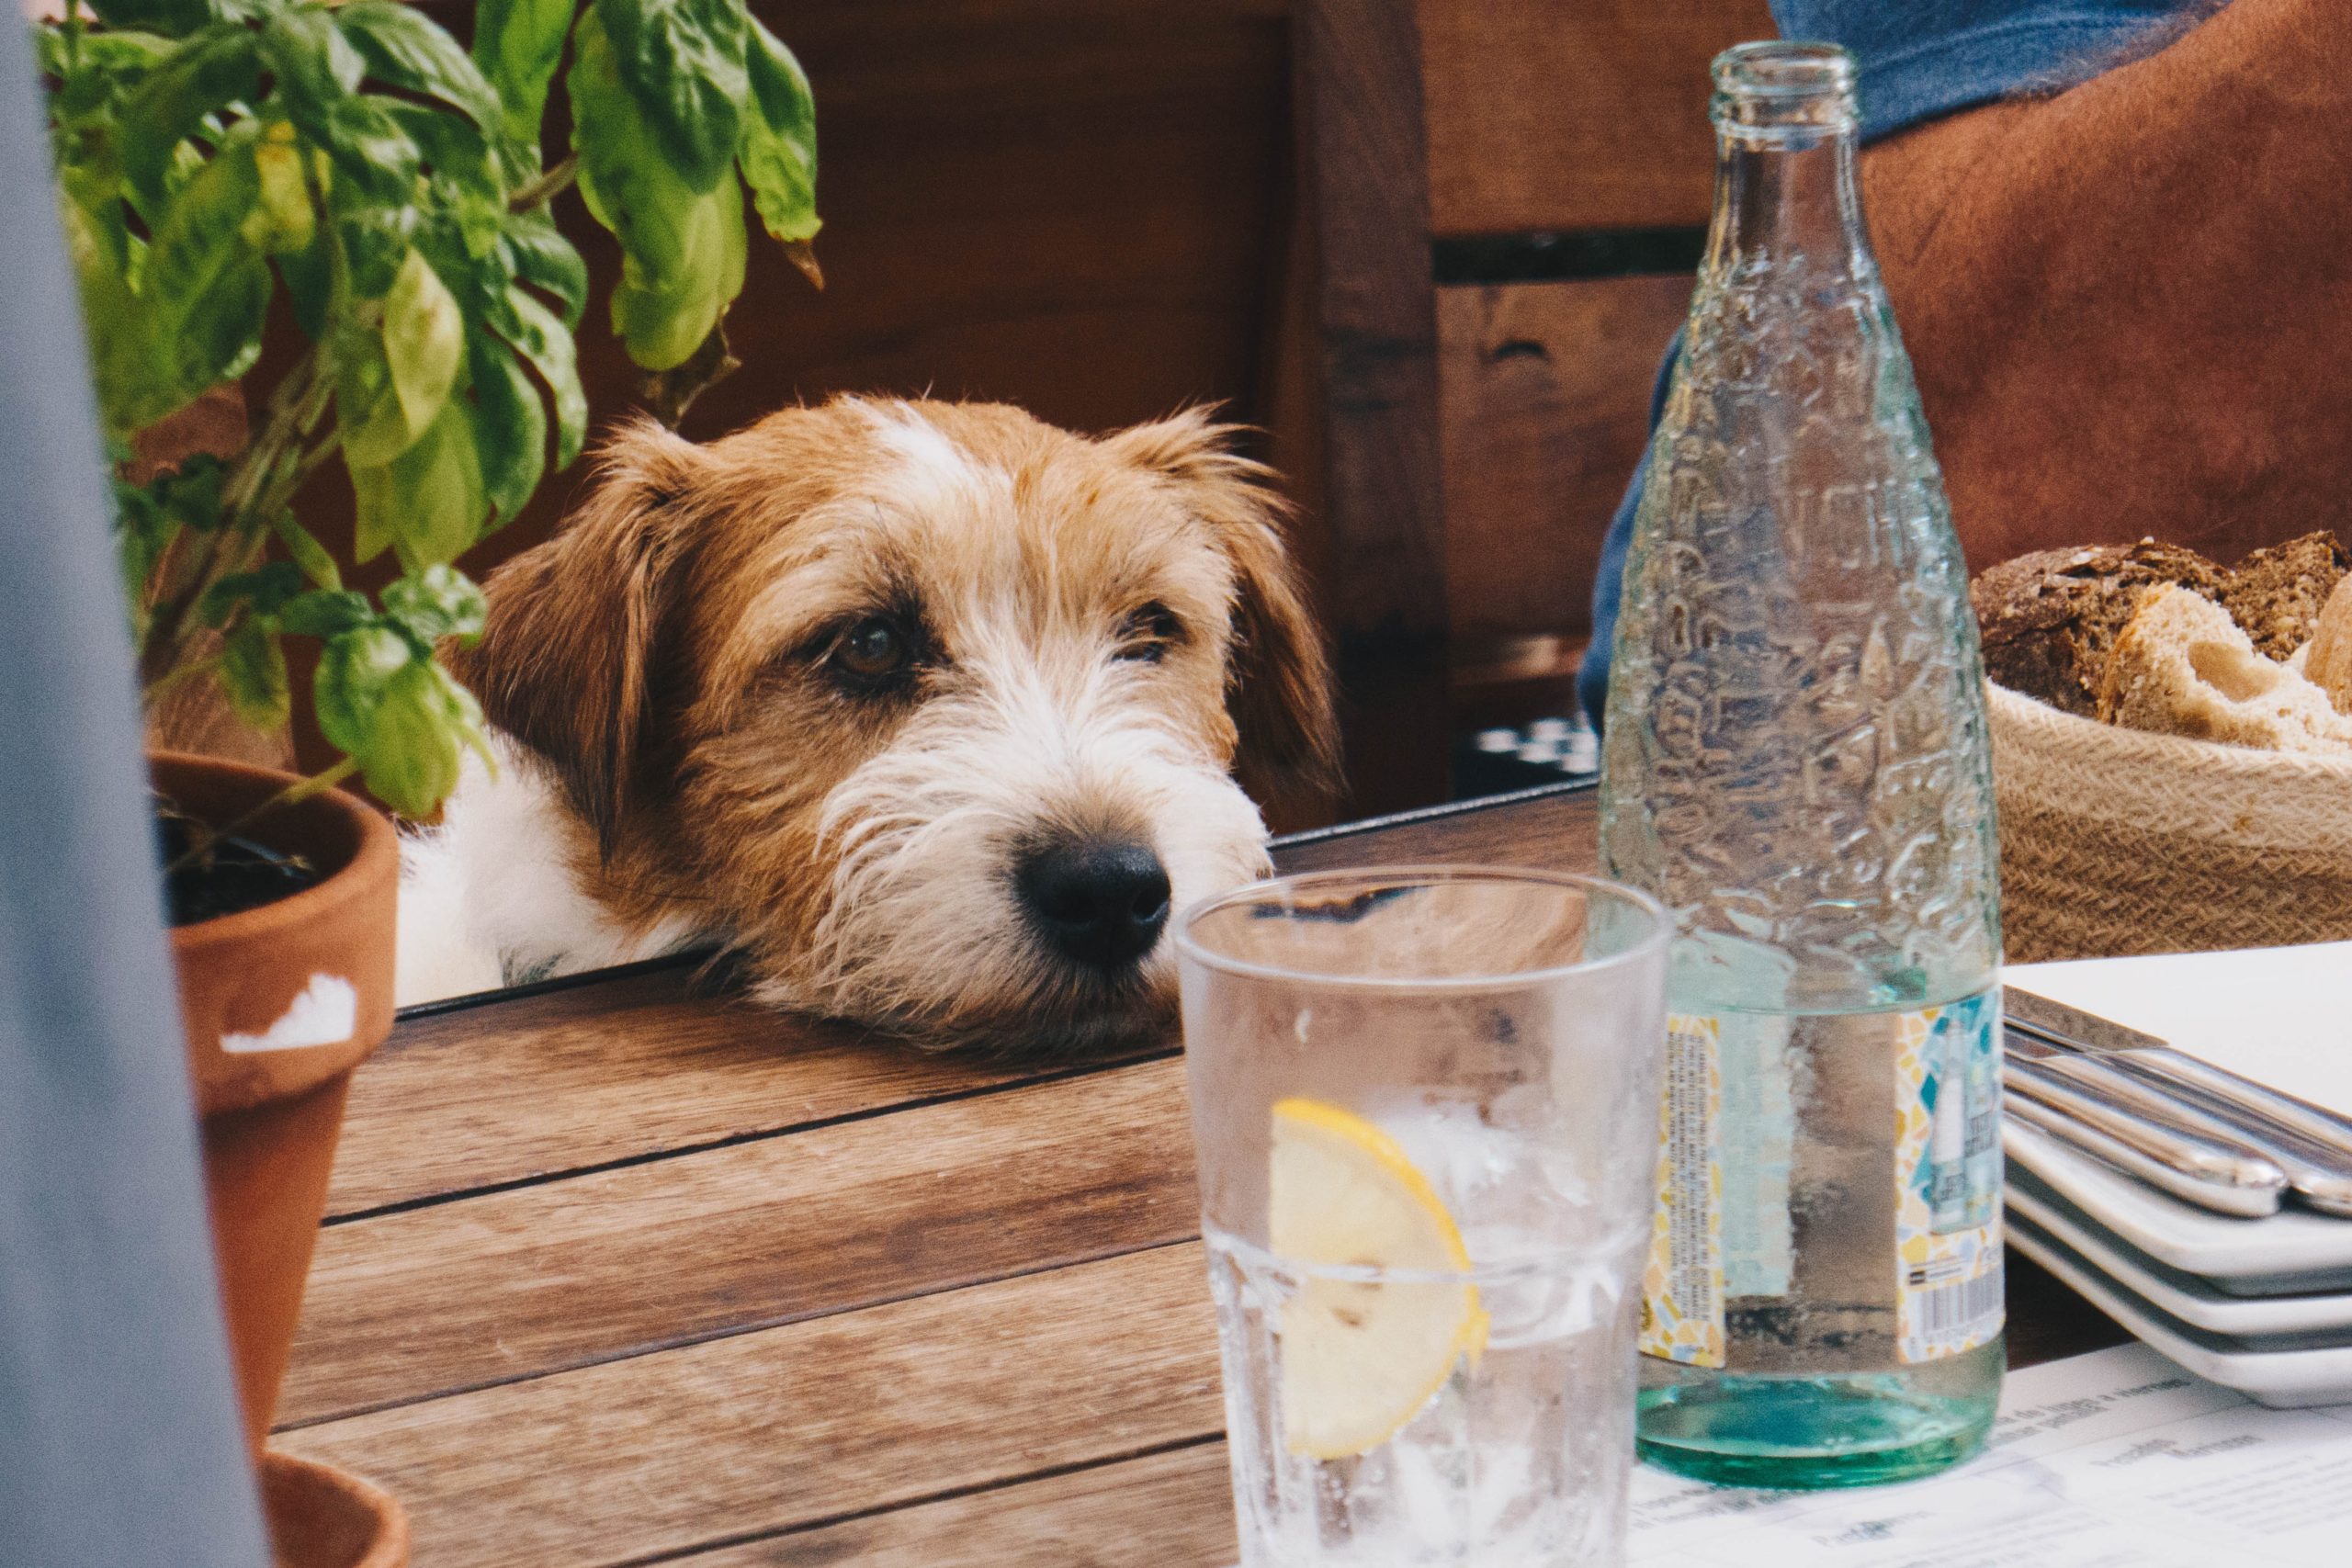 Dog friendly restaurants: Best choices in the US